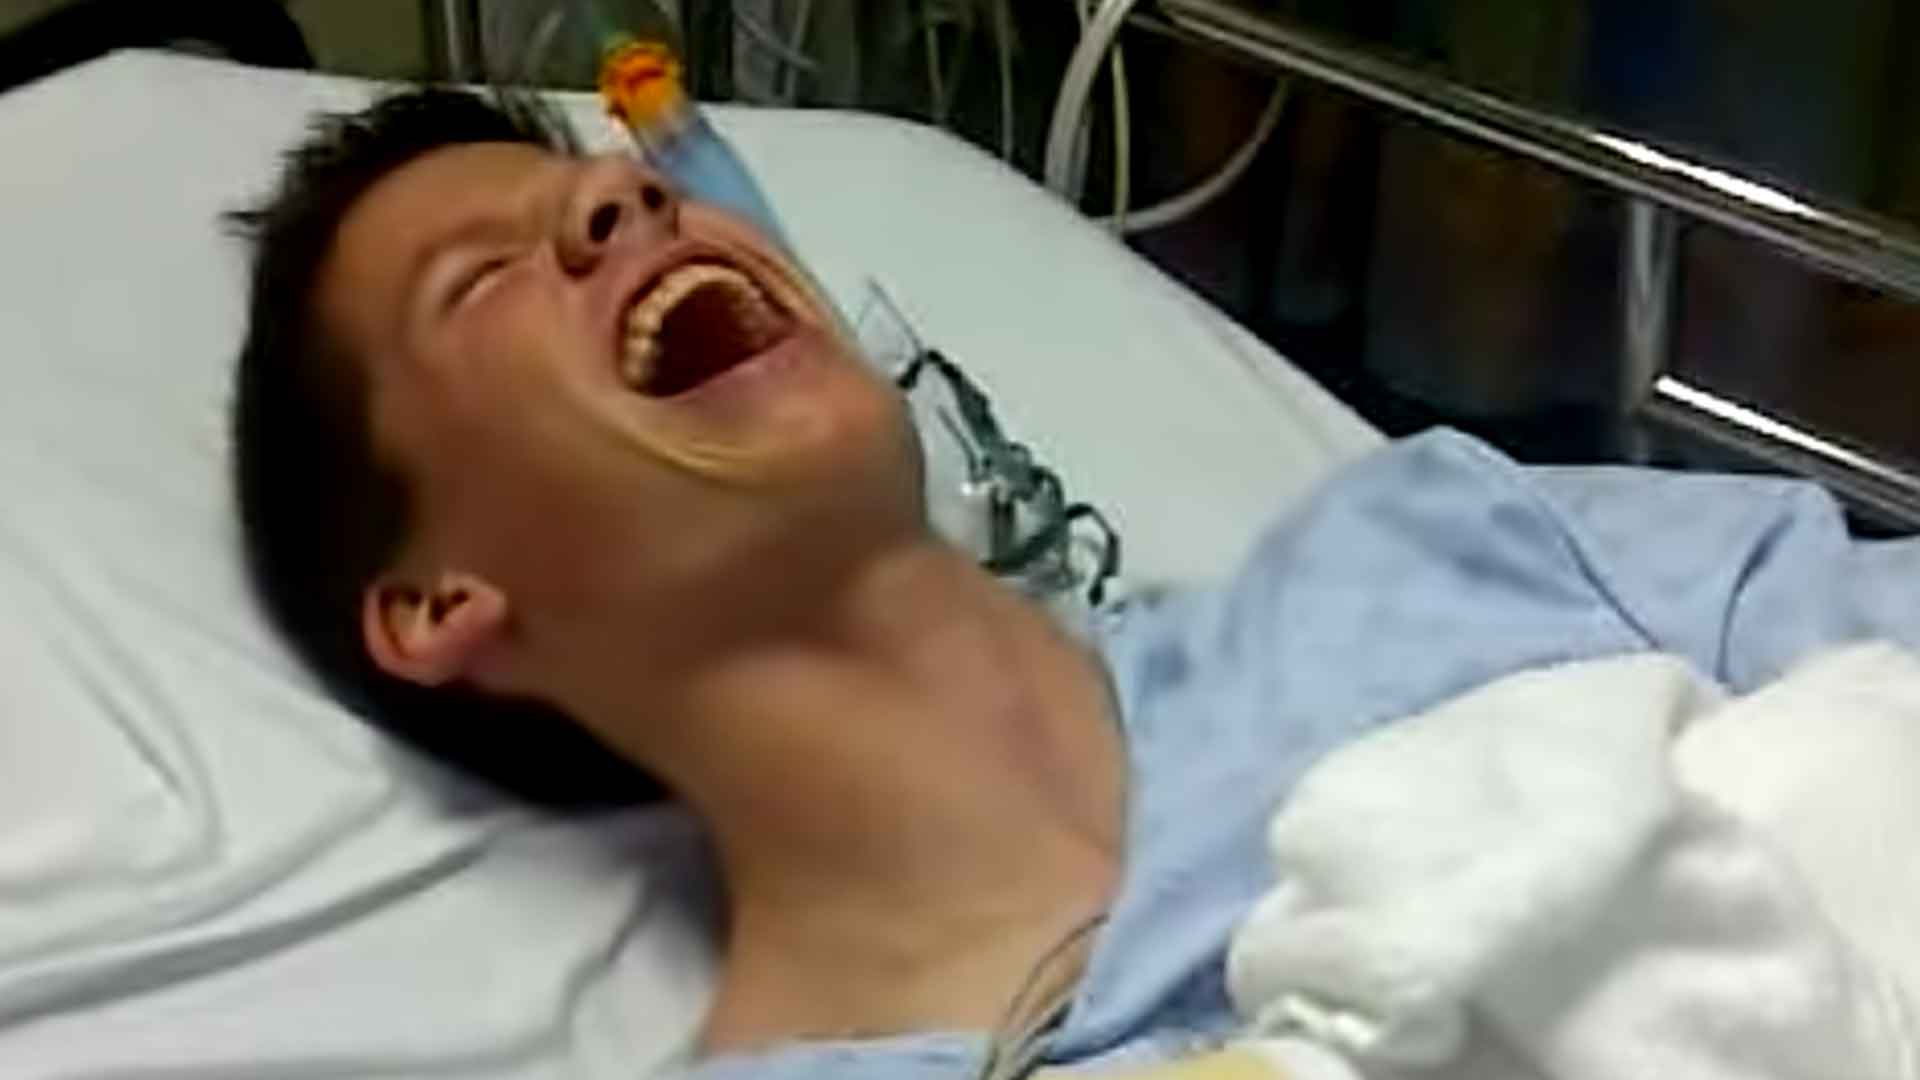 High Teen Can't Stop Laughing at His Broken Arm